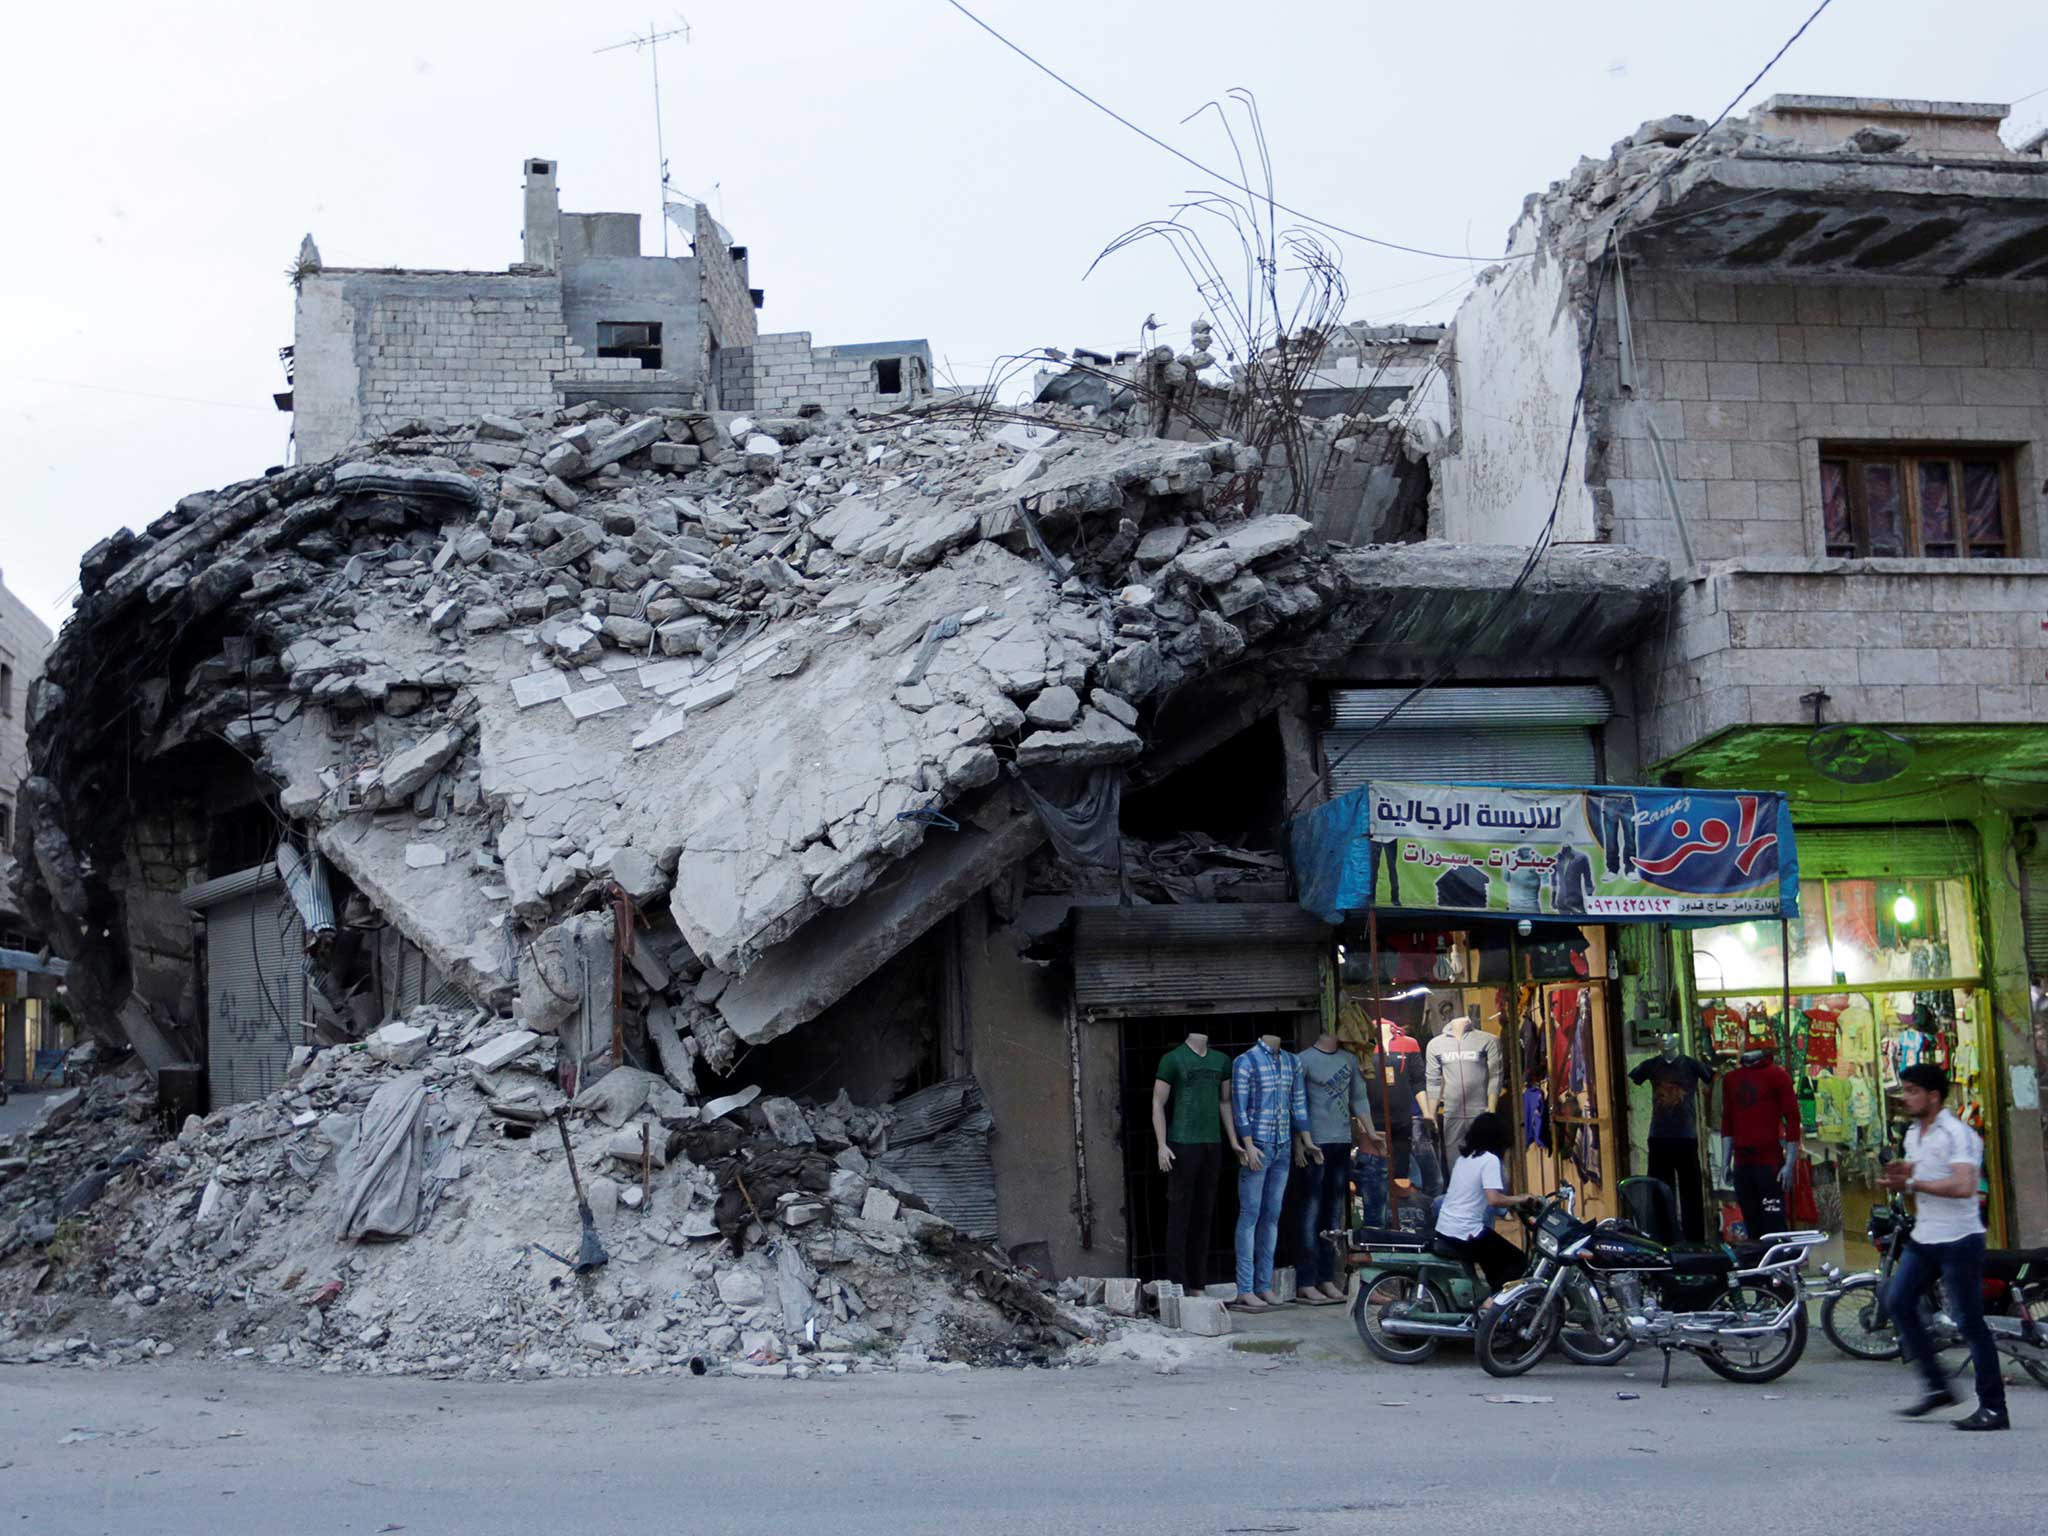 A clothing shop displays its merchandise beside a damaged building in the rebel-controlled area of Maaret al-Numan town in Idlib province, Syria